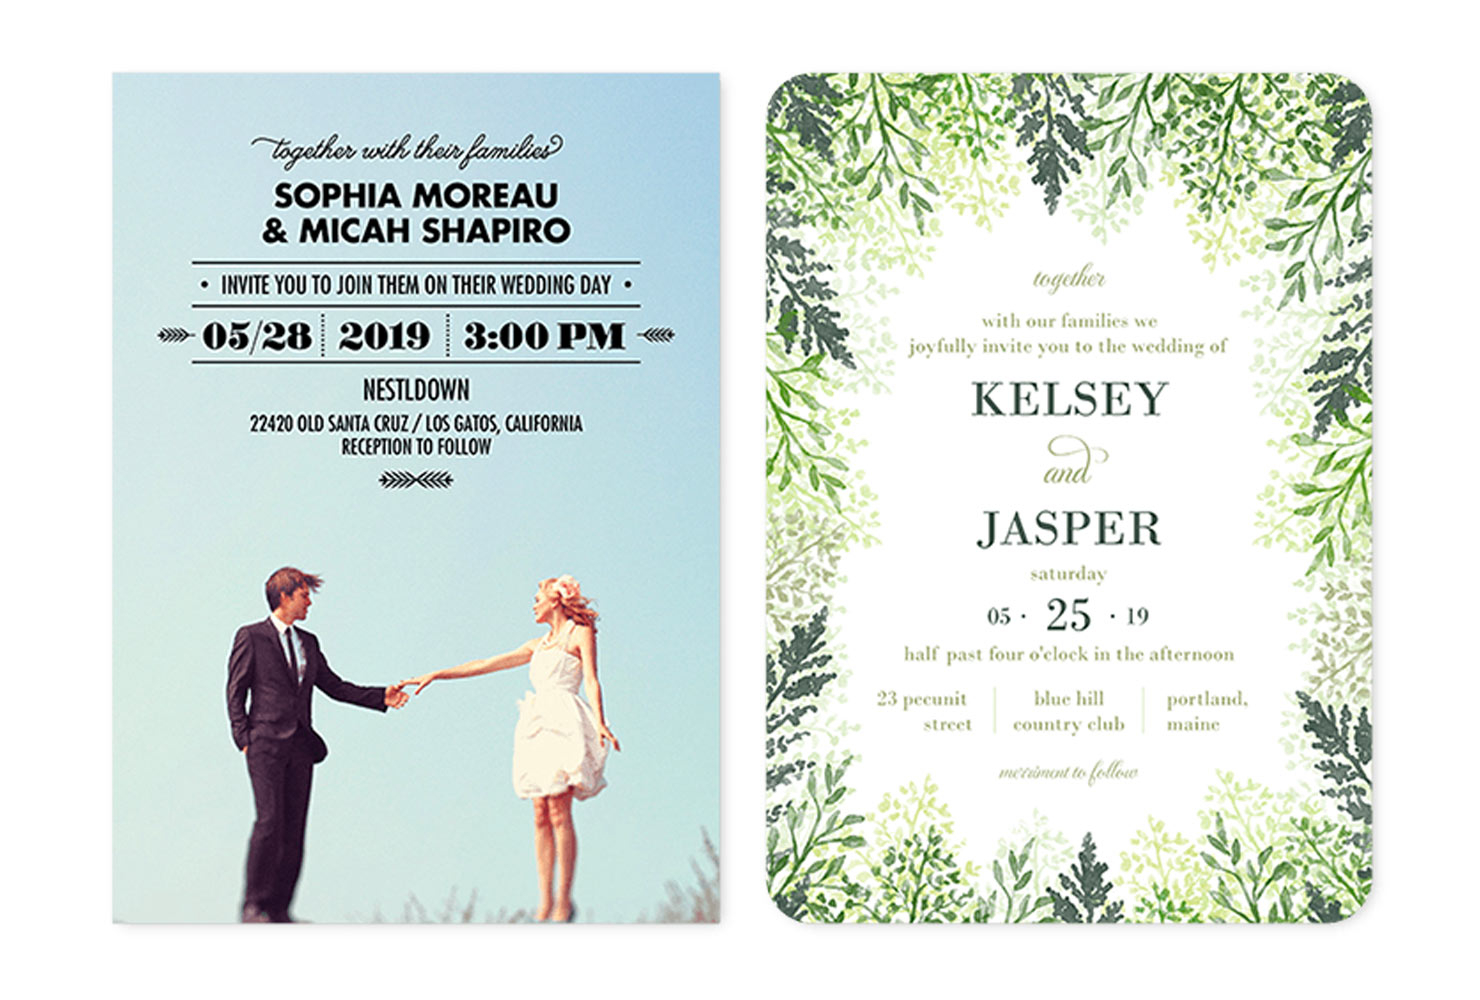 What To Say On Wedding Invitations 35 Wedding Invitation Wording Examples 2018 Shutterfly